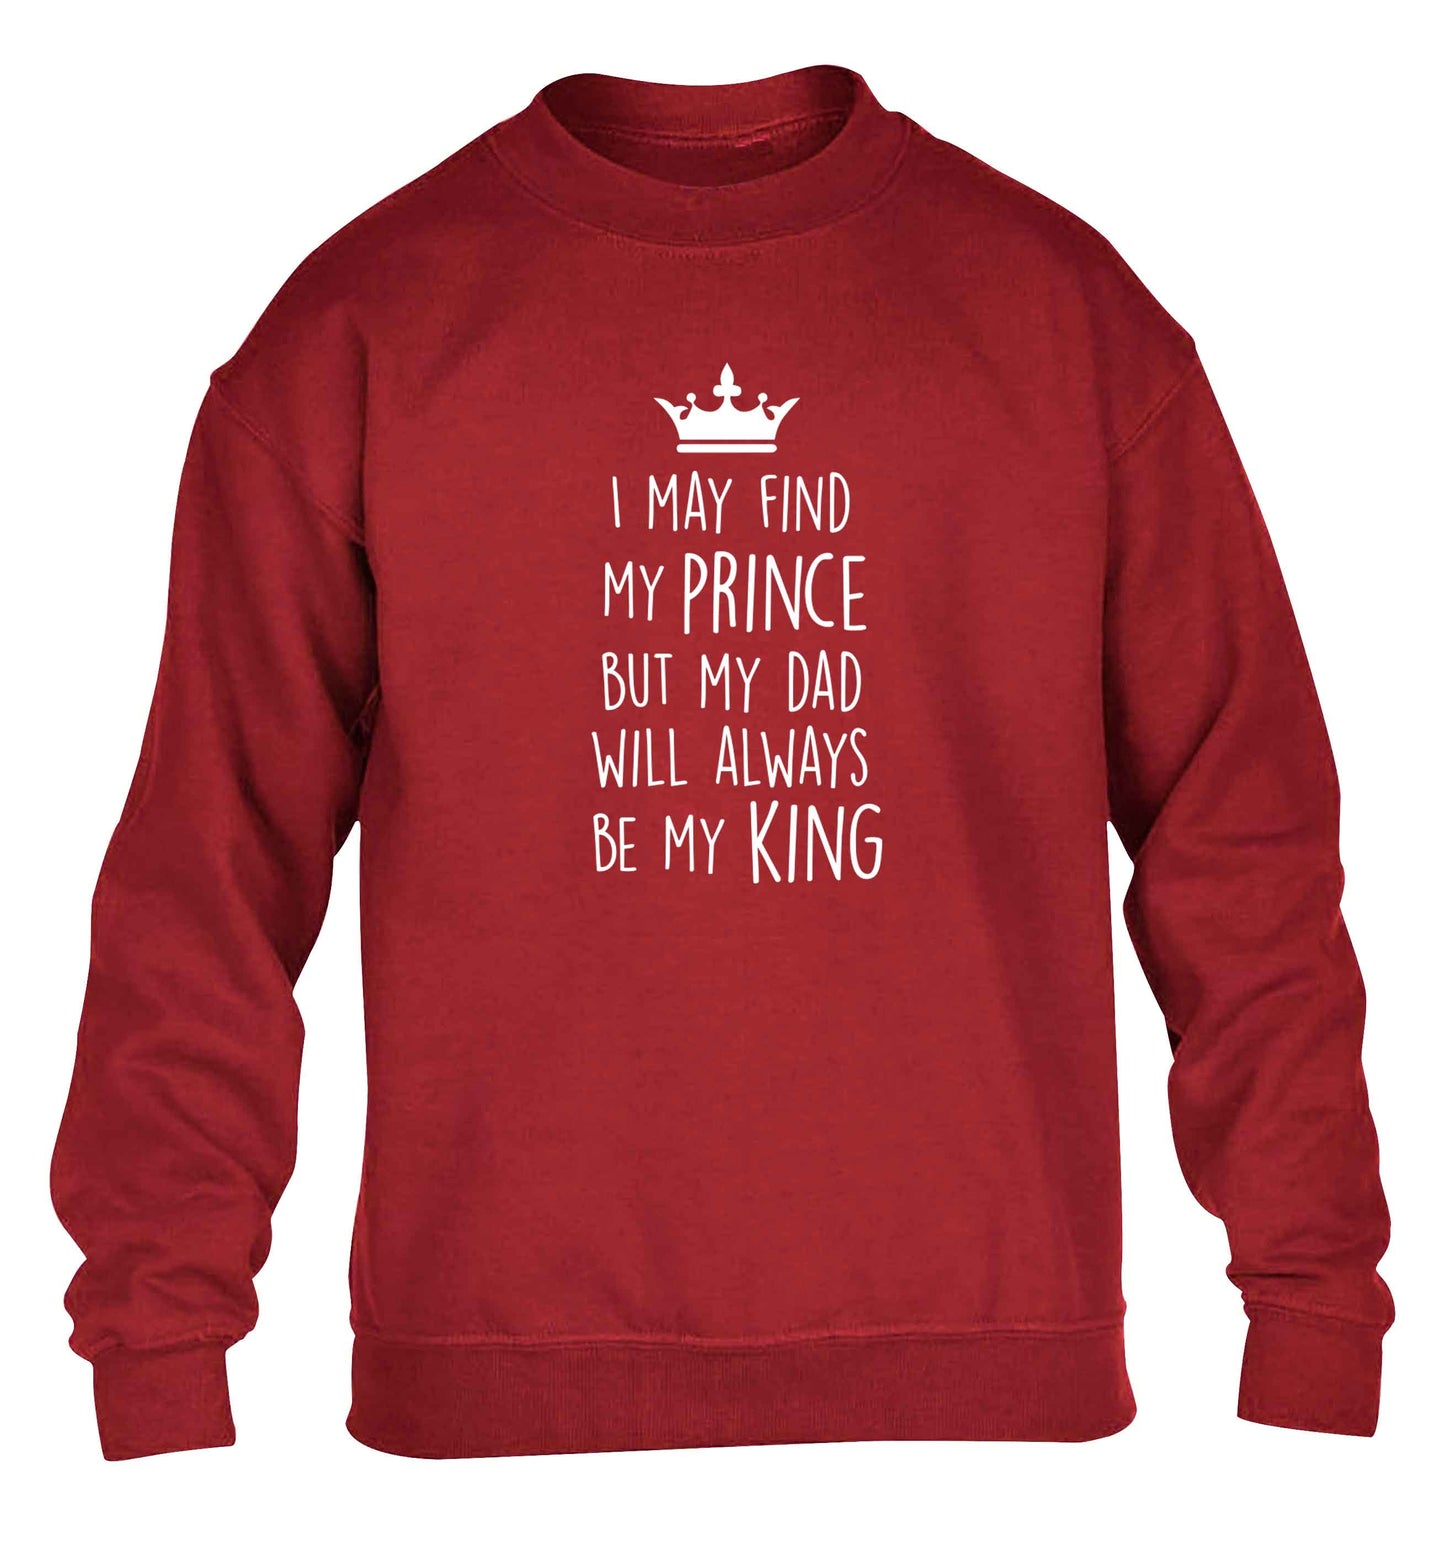 I may find my prince but my dad will always be my king children's grey sweater 12-13 Years